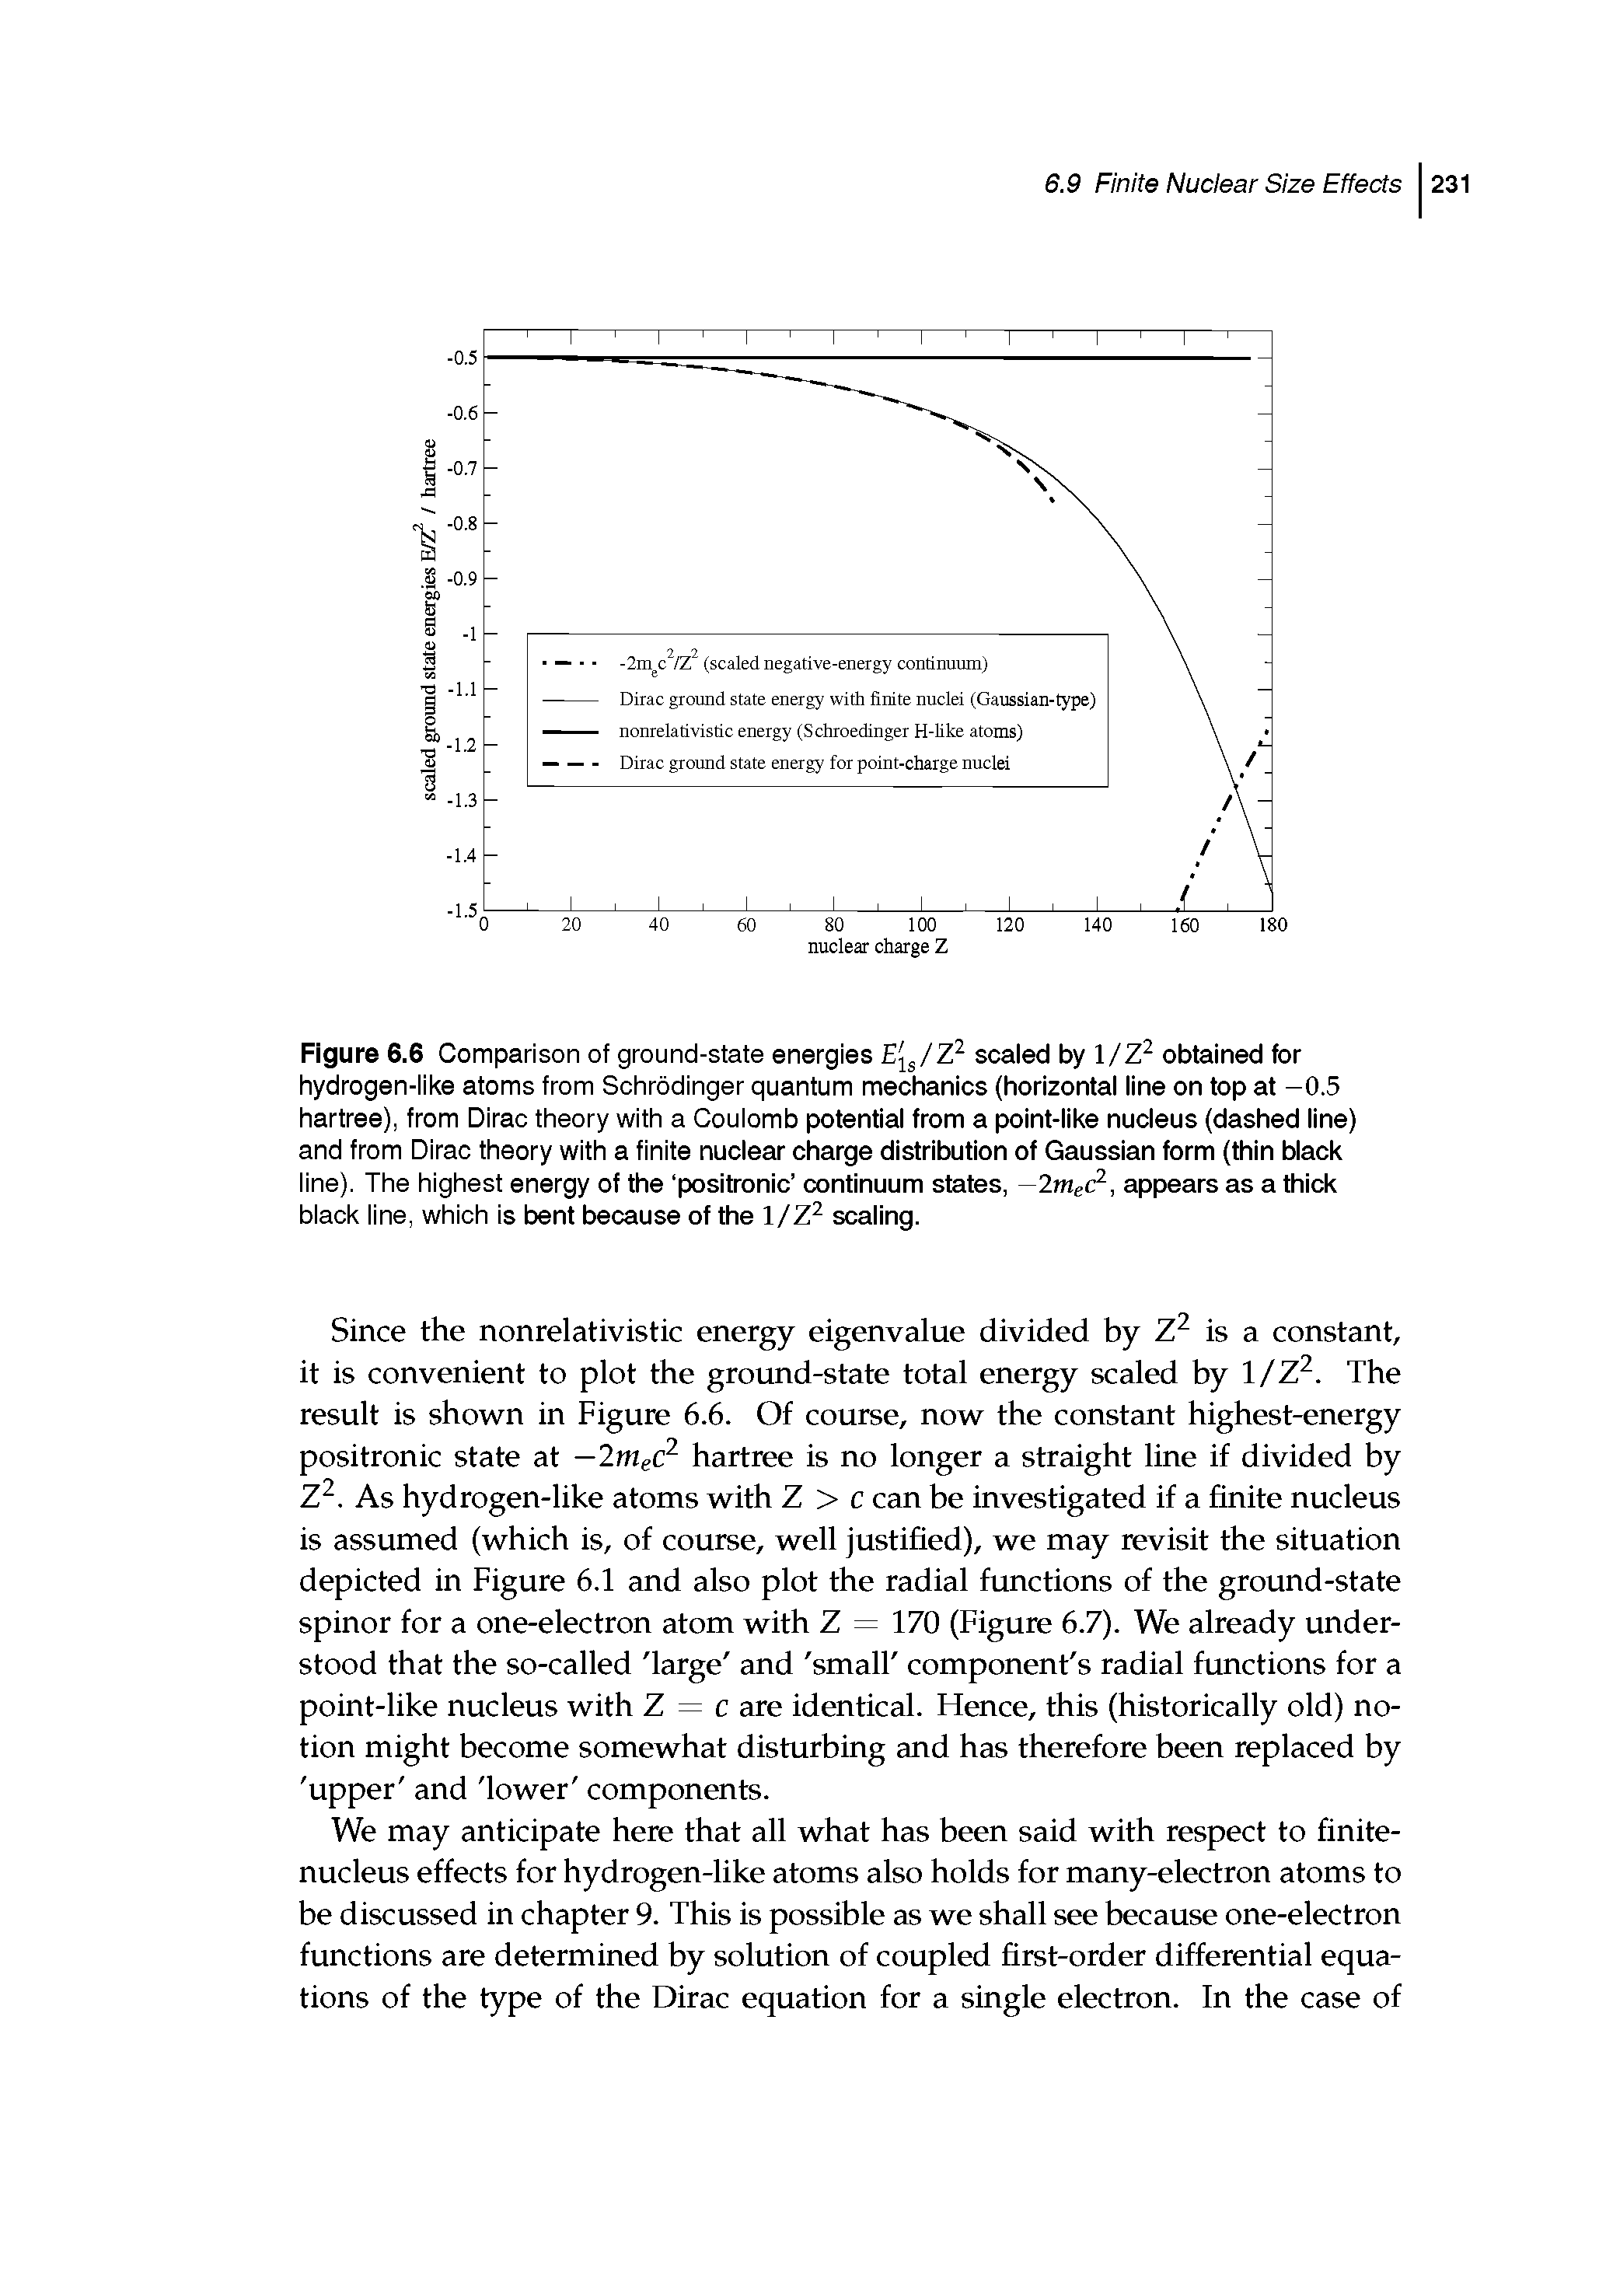 Figure 6.6 Comparison of ground-state energies E[glZ scaled by I7 obtained tor hydrogen-iike atoms from Schrodinger quantum mechanics (horizontal line on top at -0.5 hartree), from Dirac theory with a Couiomb potential from a point-like nucleus (dashed line) and from Dirac theory with a finite nuclear charge distribution of Gaussian form (thin black line). The highest energy of the positronic continuum states, -2meC, appears as a thick black line, which is bent because of the l/Z scaling.